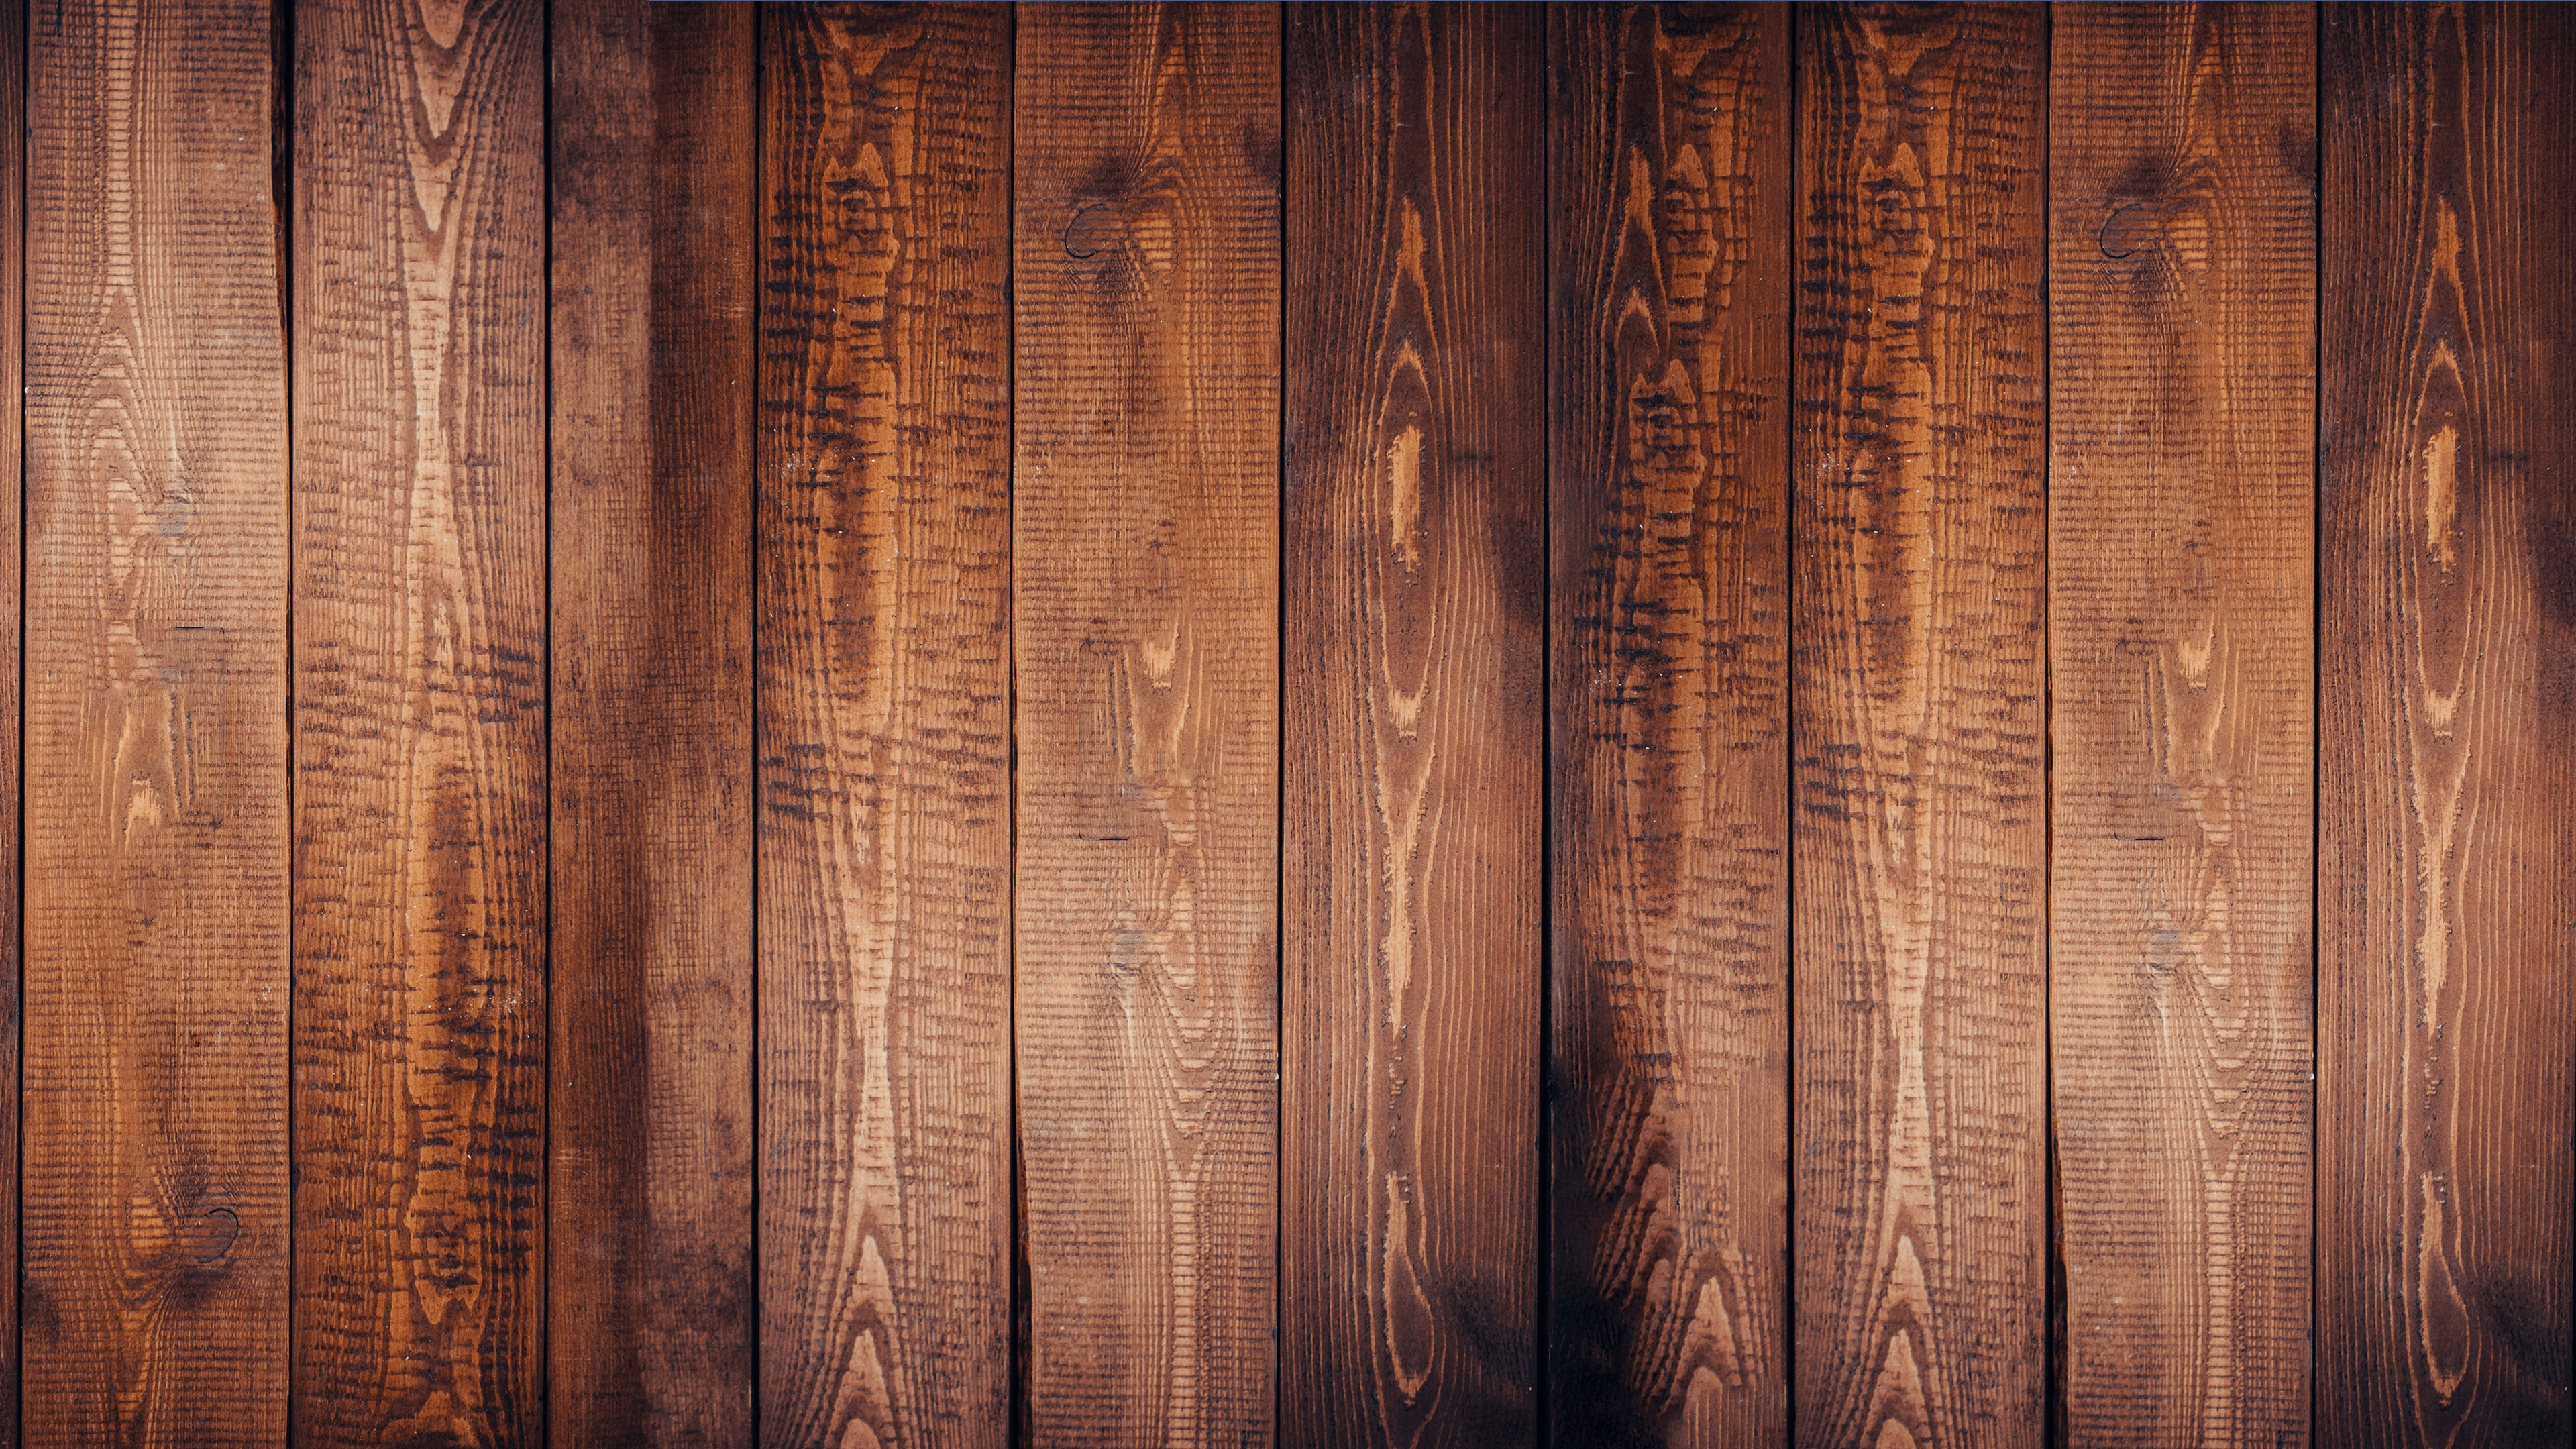 Aged wood, Weathered texture, Wooden planks, Time-worn, 3840x2160 4K Desktop